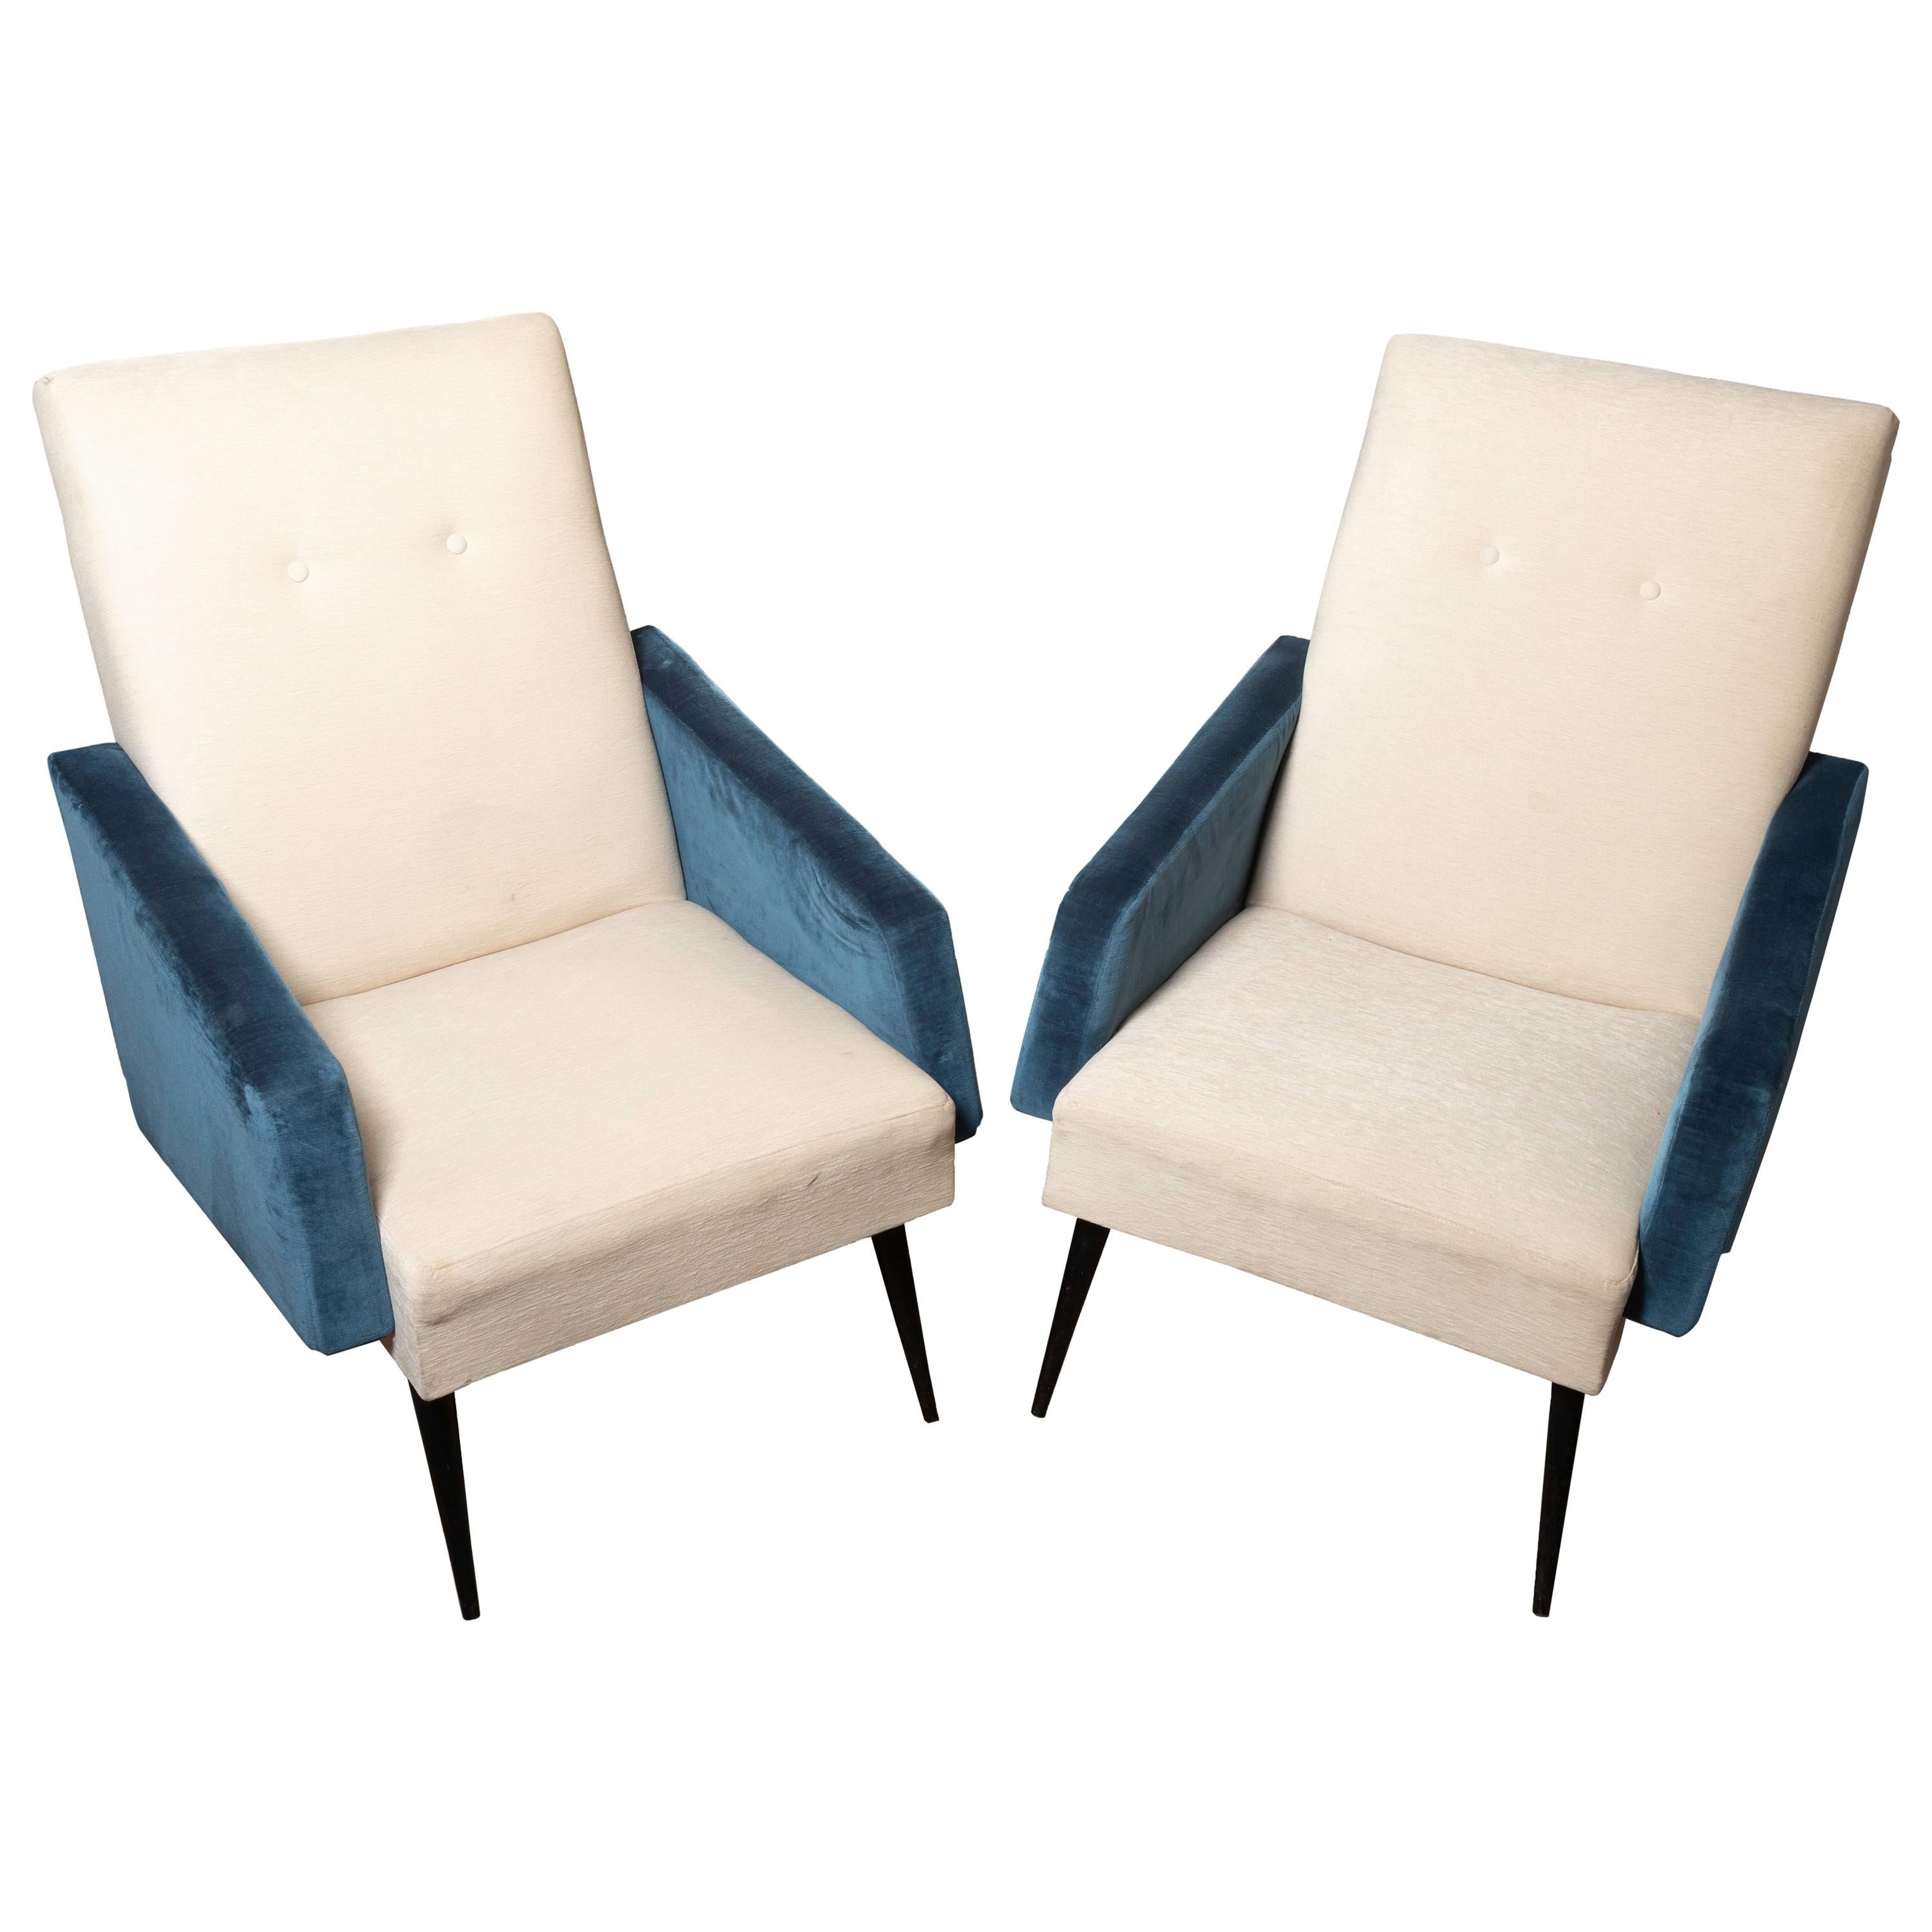 Pair of Blue and White Upholstered Armchairs